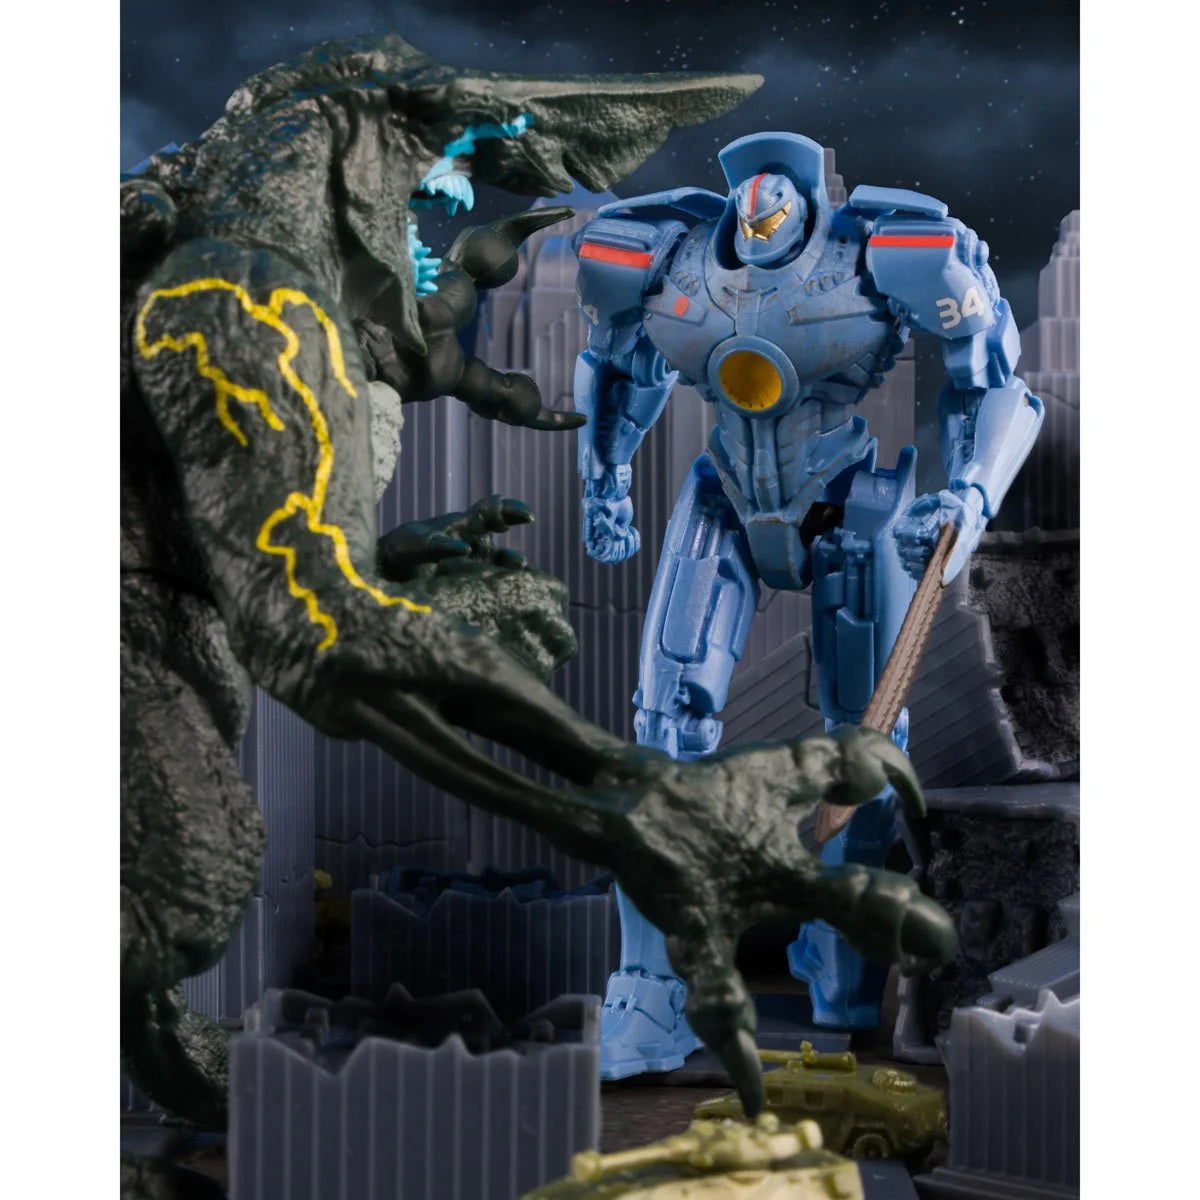 Pacific Rim Jaeger Wave 1 Gipsy Danger 4-Inch Scale Action Figure with Comic Book